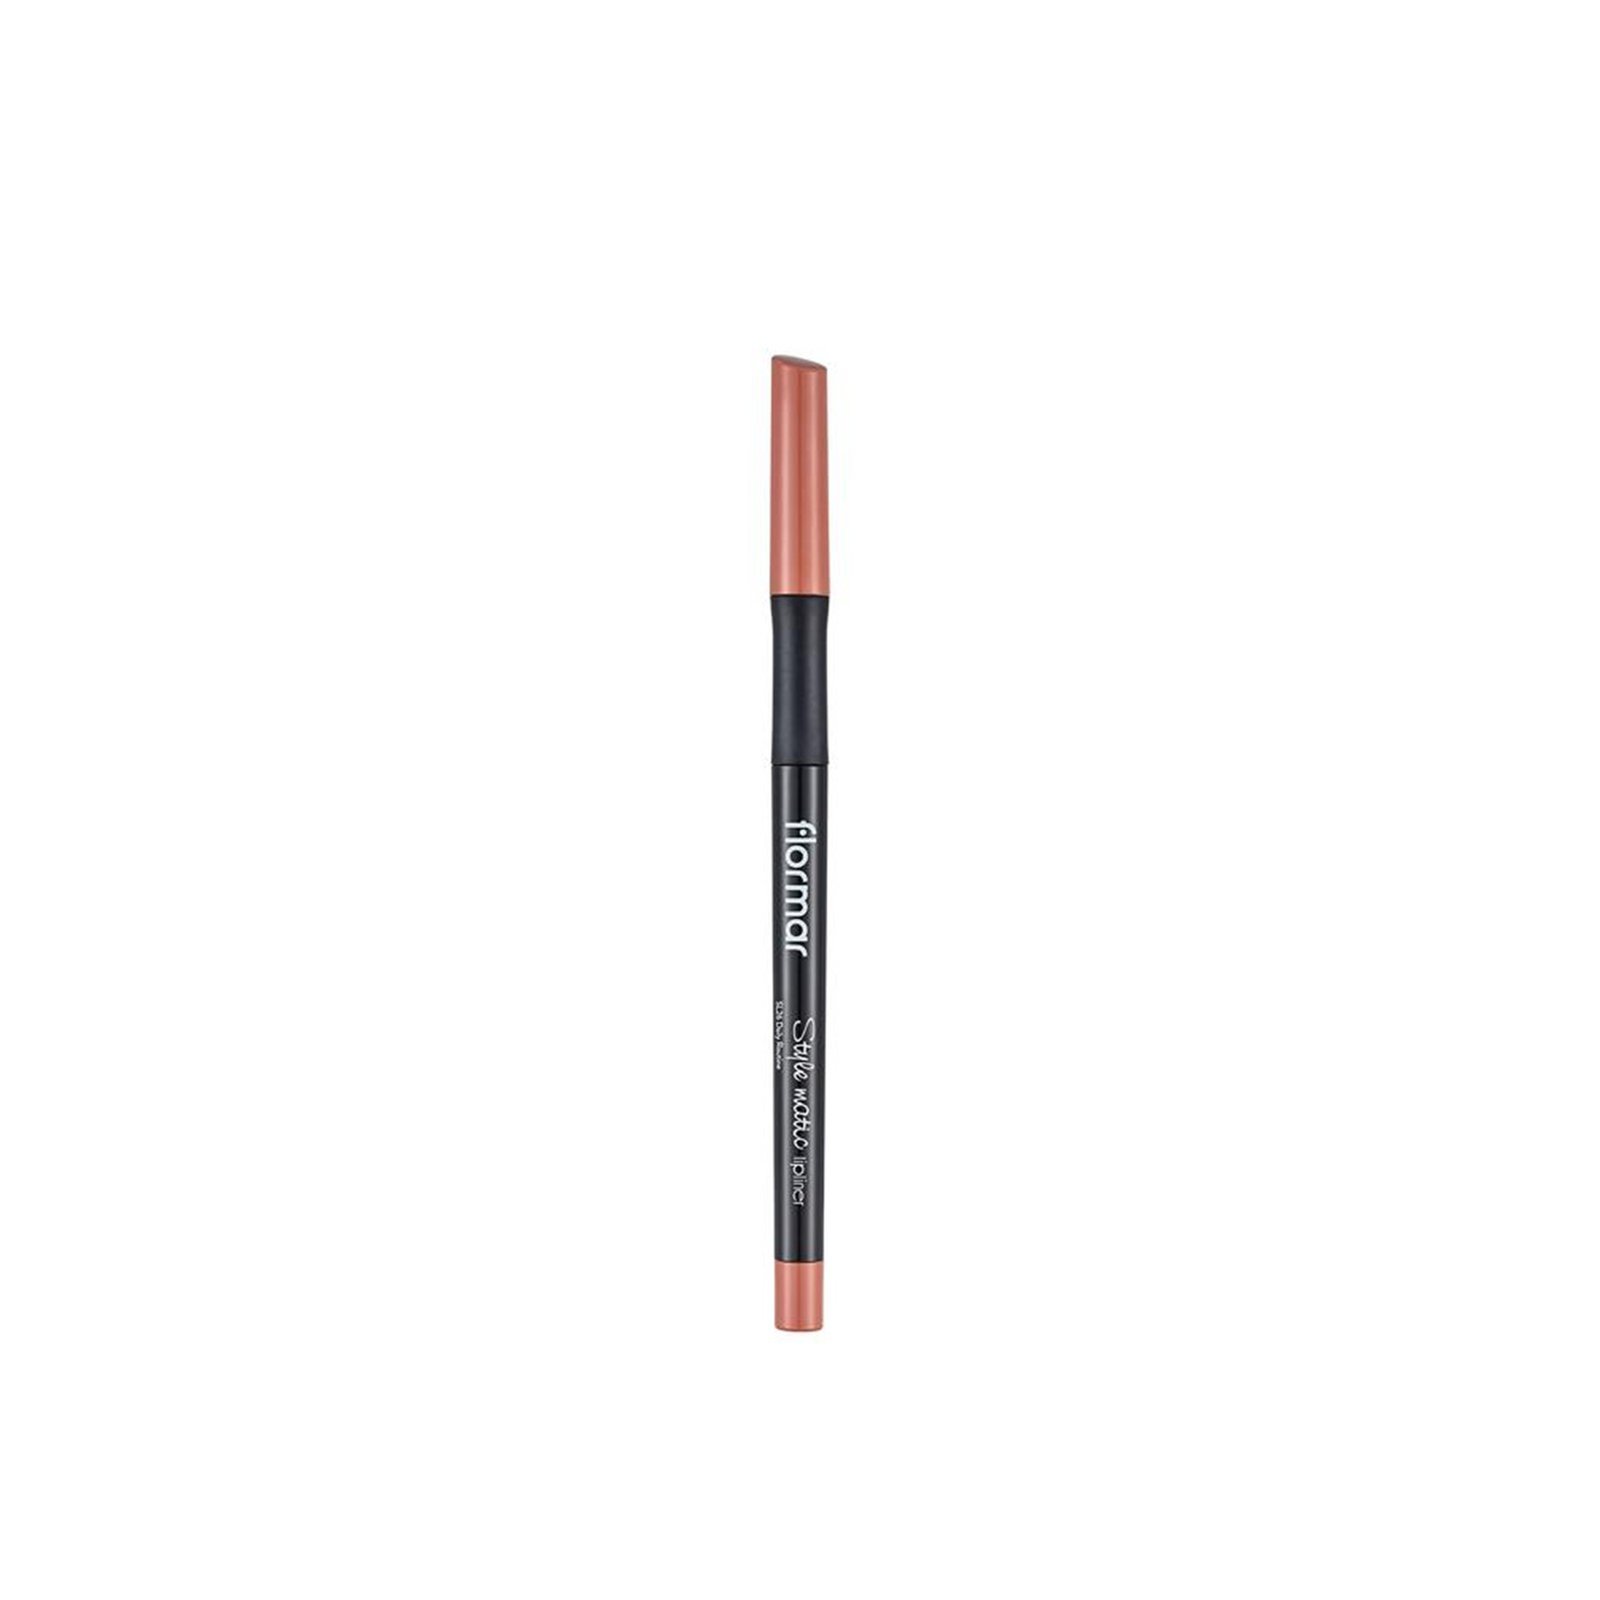 Flormar Stylematic Lipliner SL26 Daily Routine 0.35g